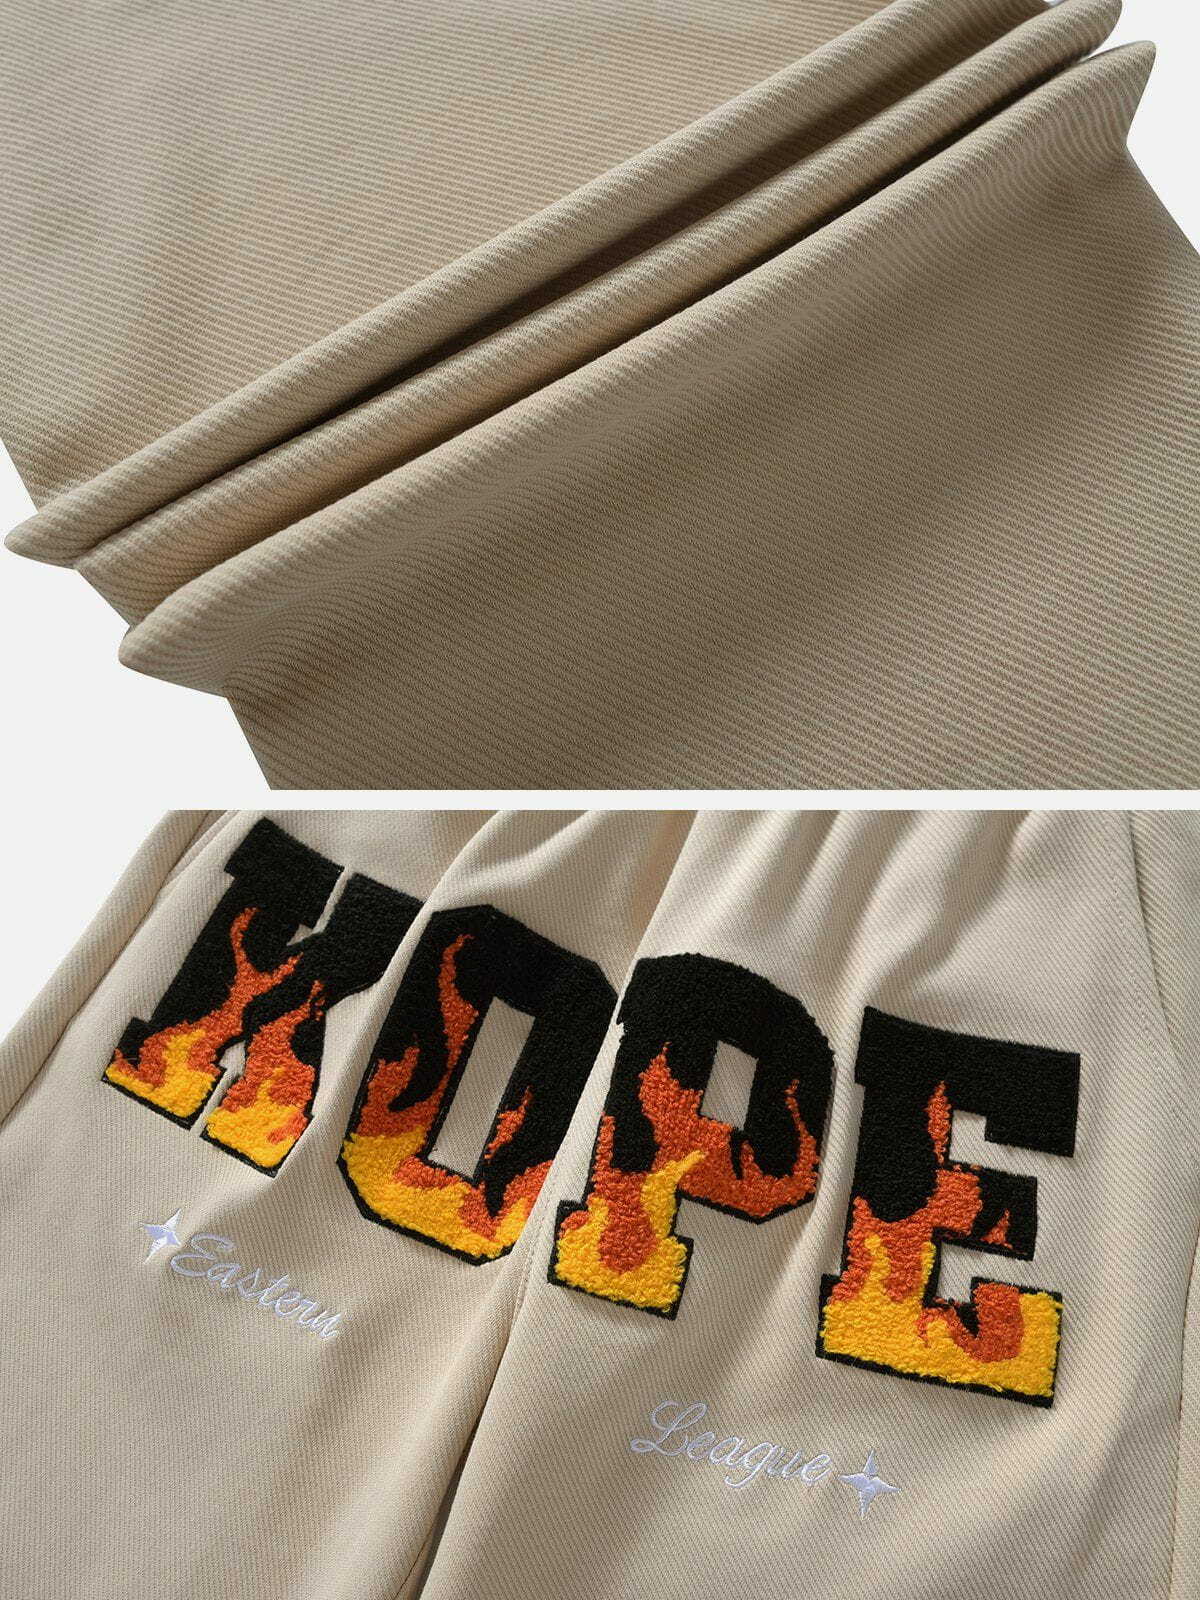 flaming letters sweatpants edgy & vibrant streetwear 8800